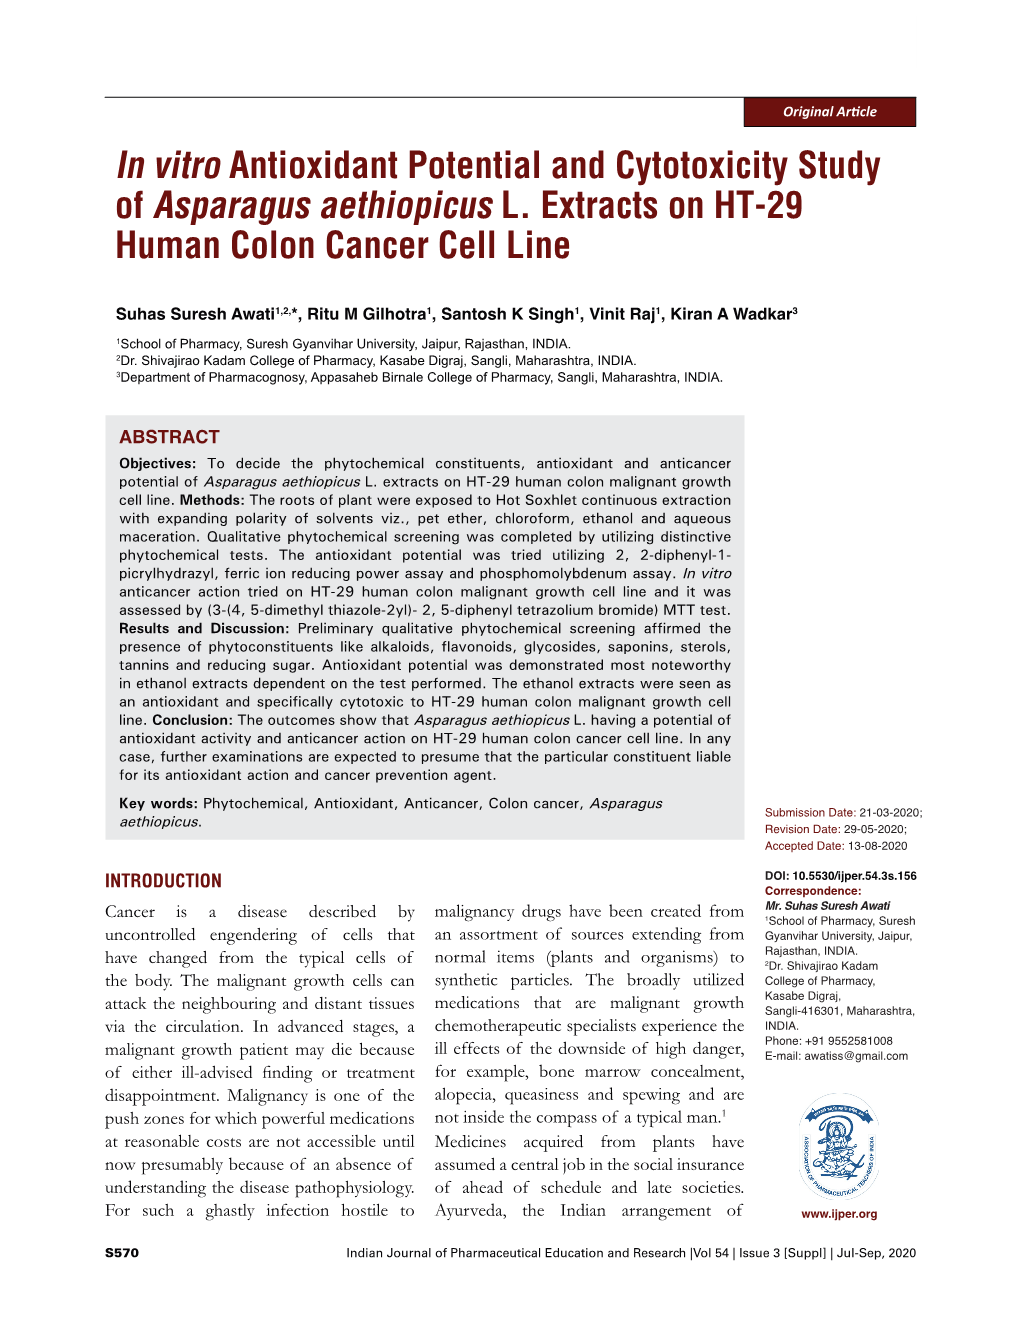 In Vitro Antioxidant Potential and Cytotoxicity Study of Asparagus Aethiopicus L